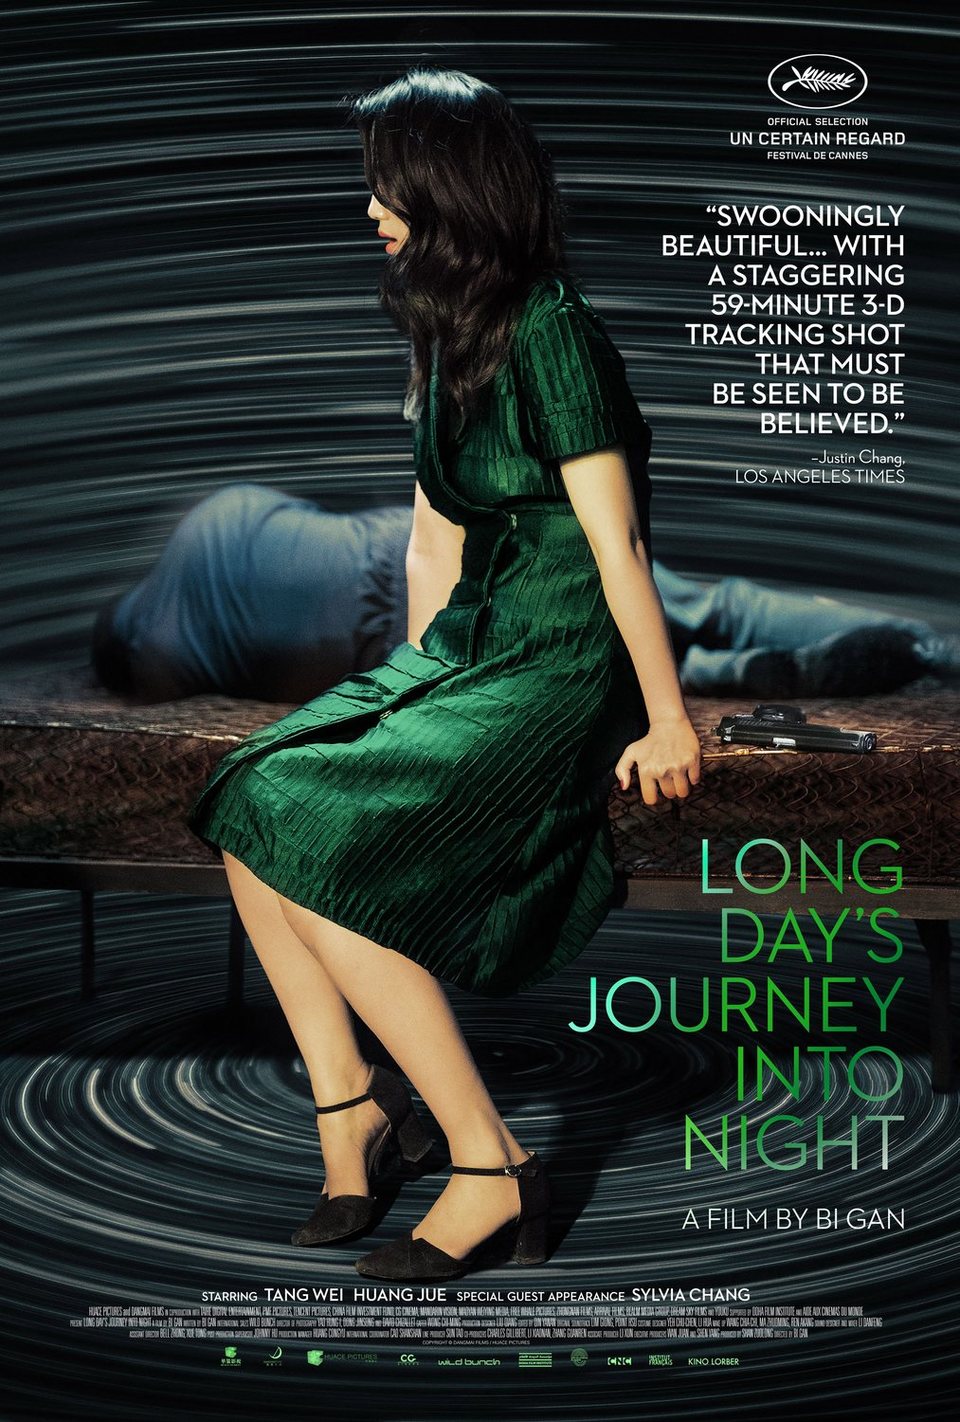 Poster of Long`s day journey into night - Poster ingles 'Long day's journey into night'